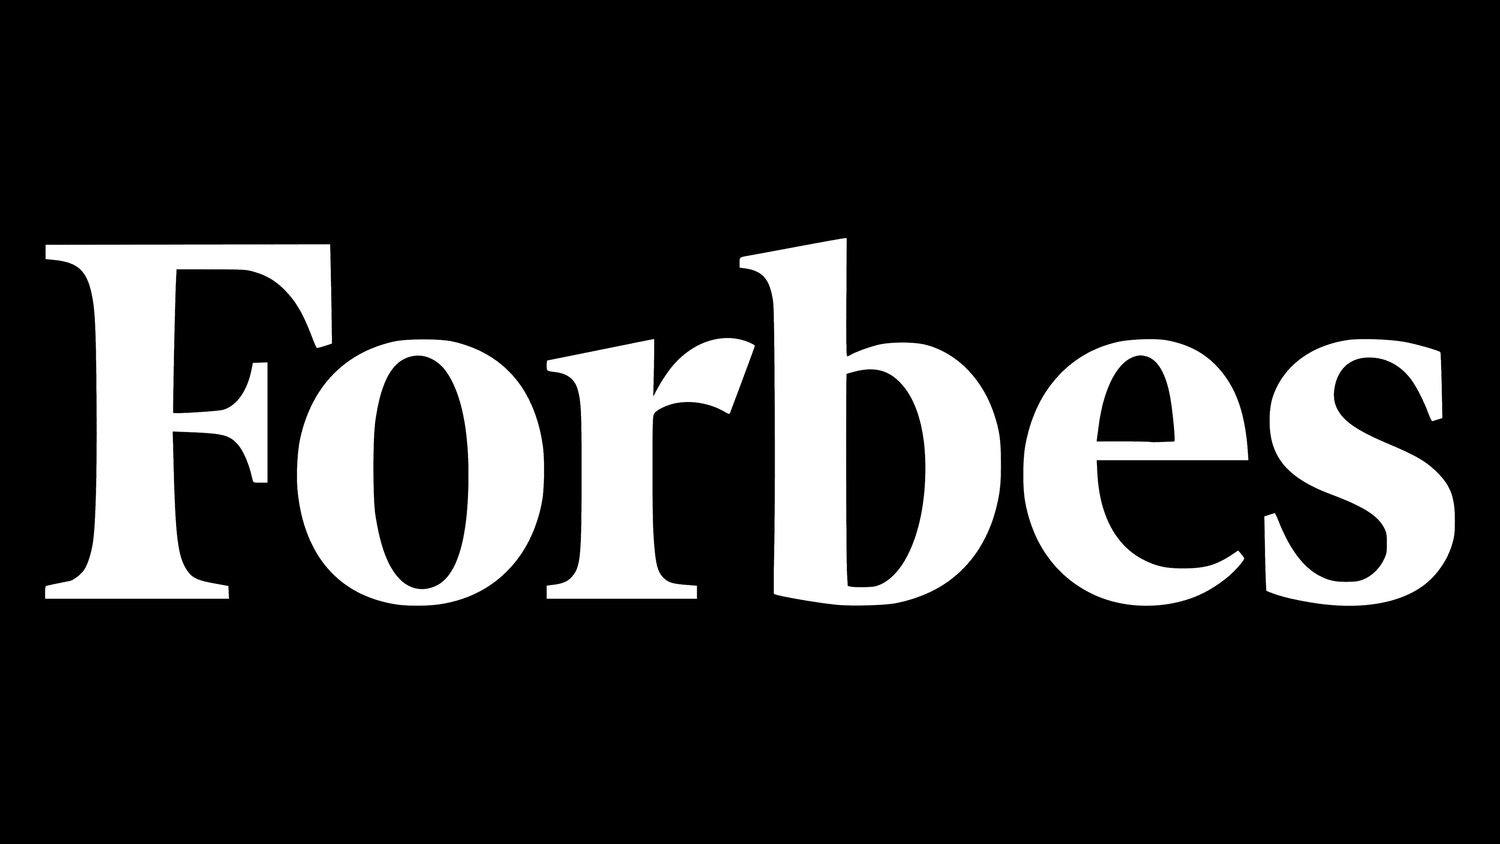 FORBES New Years